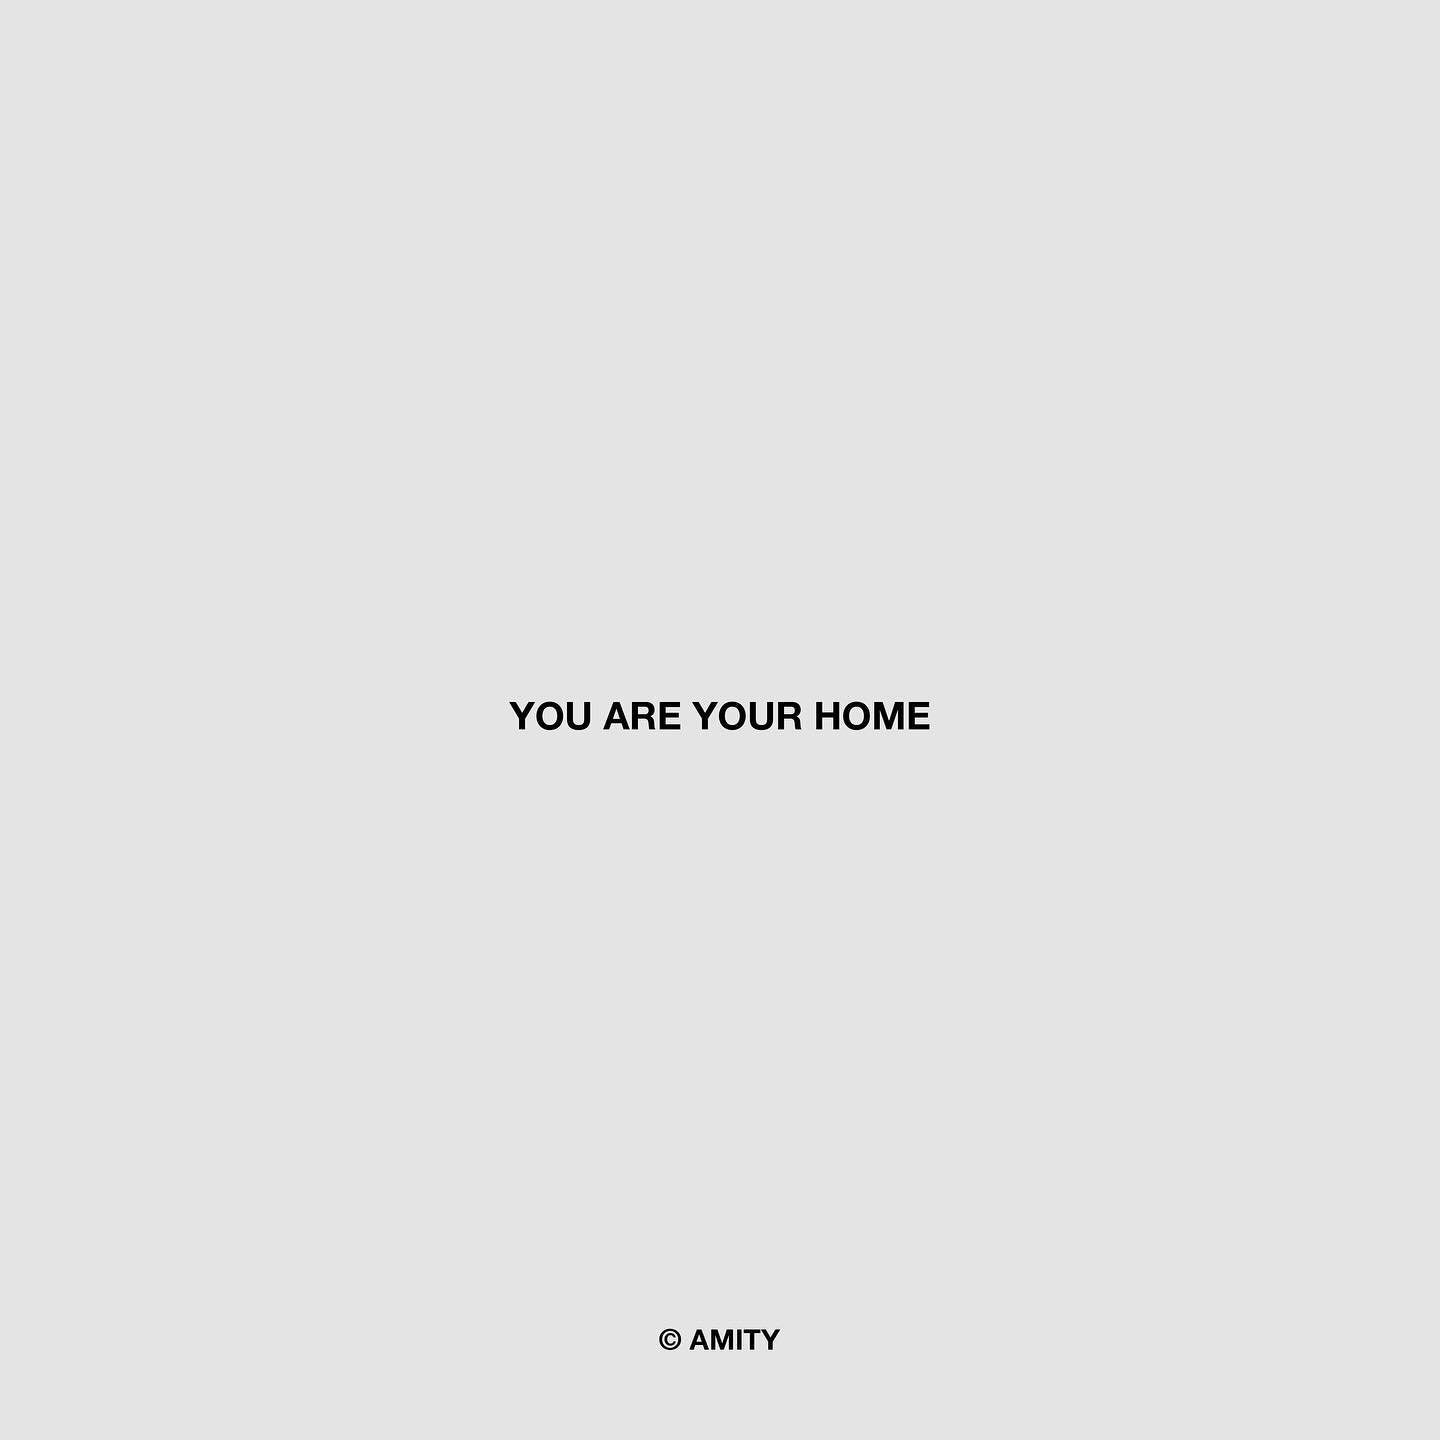 You are your home 

#selfcare #selfcarefirst #selflovejourney #selflove #selfgrowth #selfgrowthquotes #empowerment #empowering #selfempowerment